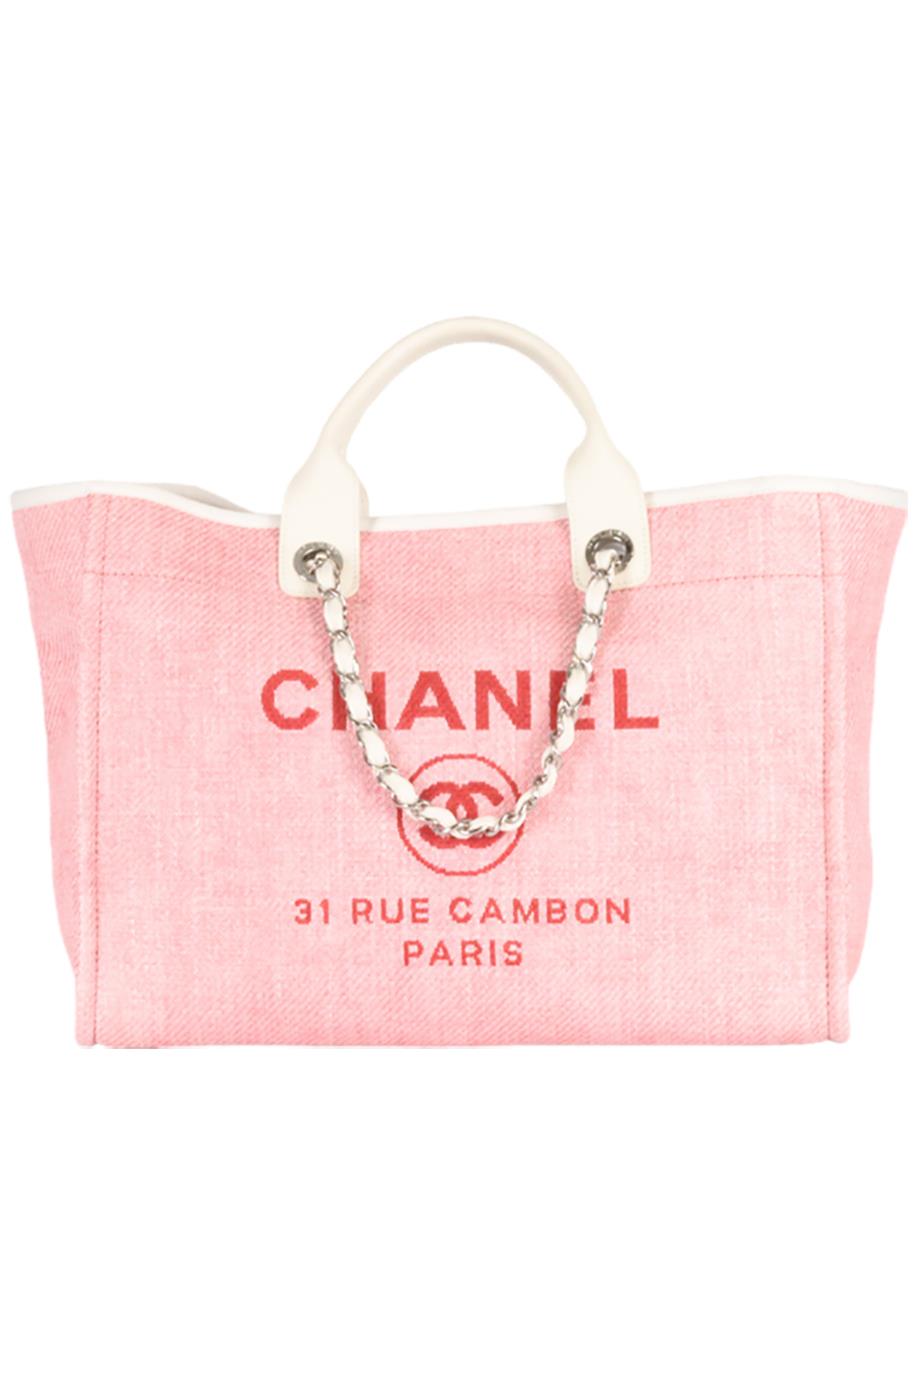 CHANEL 2014 DEAUVILLE MEDIUM CANVAS AND LEATHER TOTE BAG